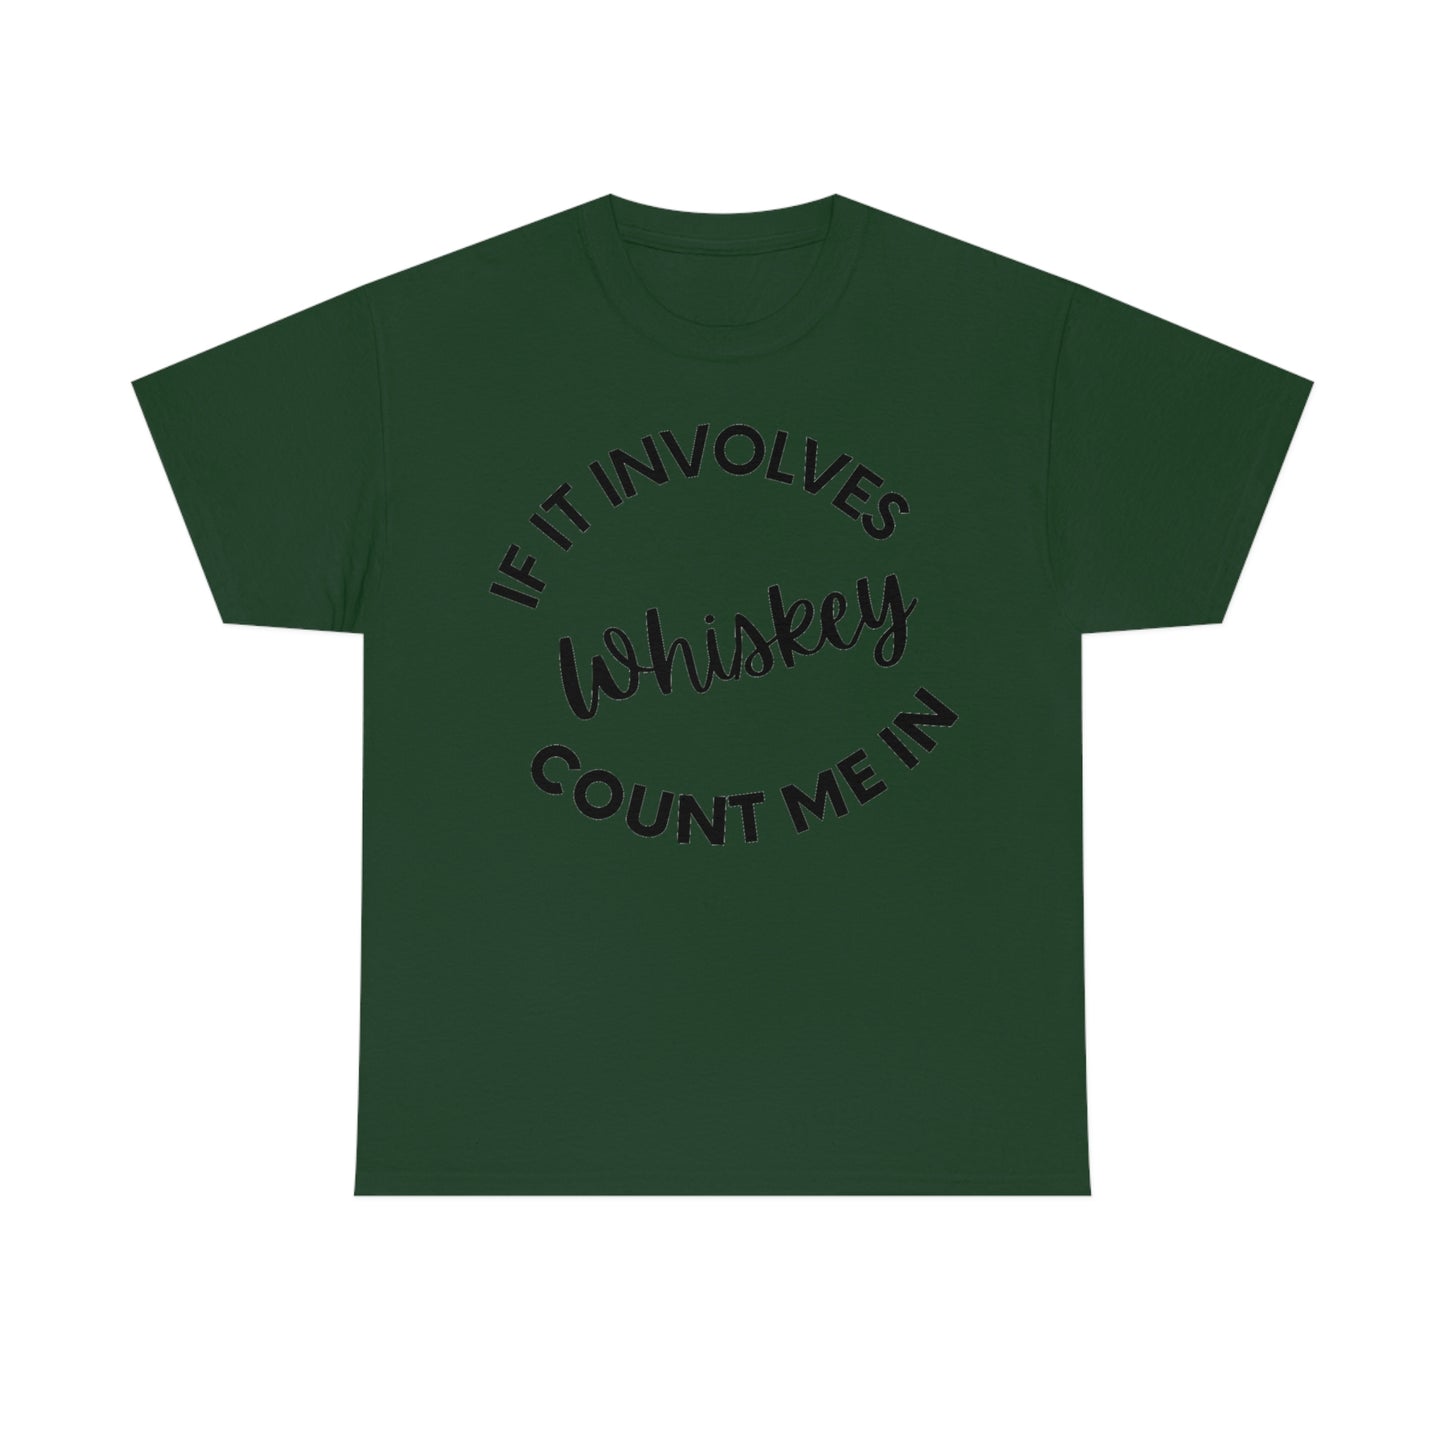 "Count Me In" Tee